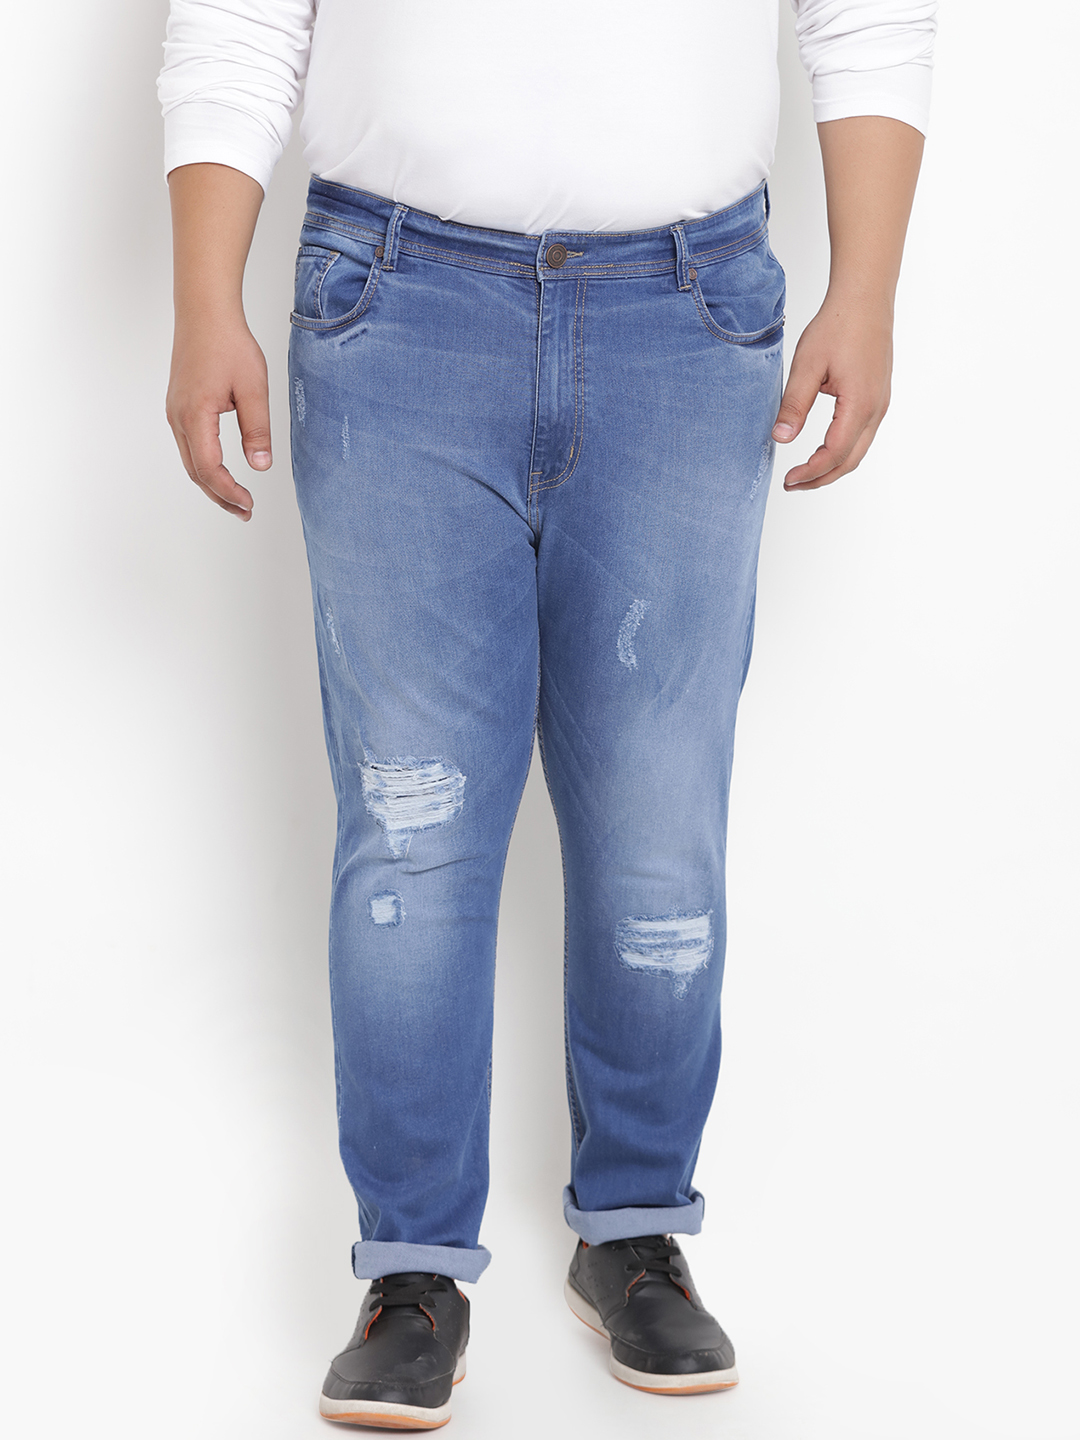 Girls Blue Jeans Price in India - Buy Girls Blue Jeans online at Shopsy.in